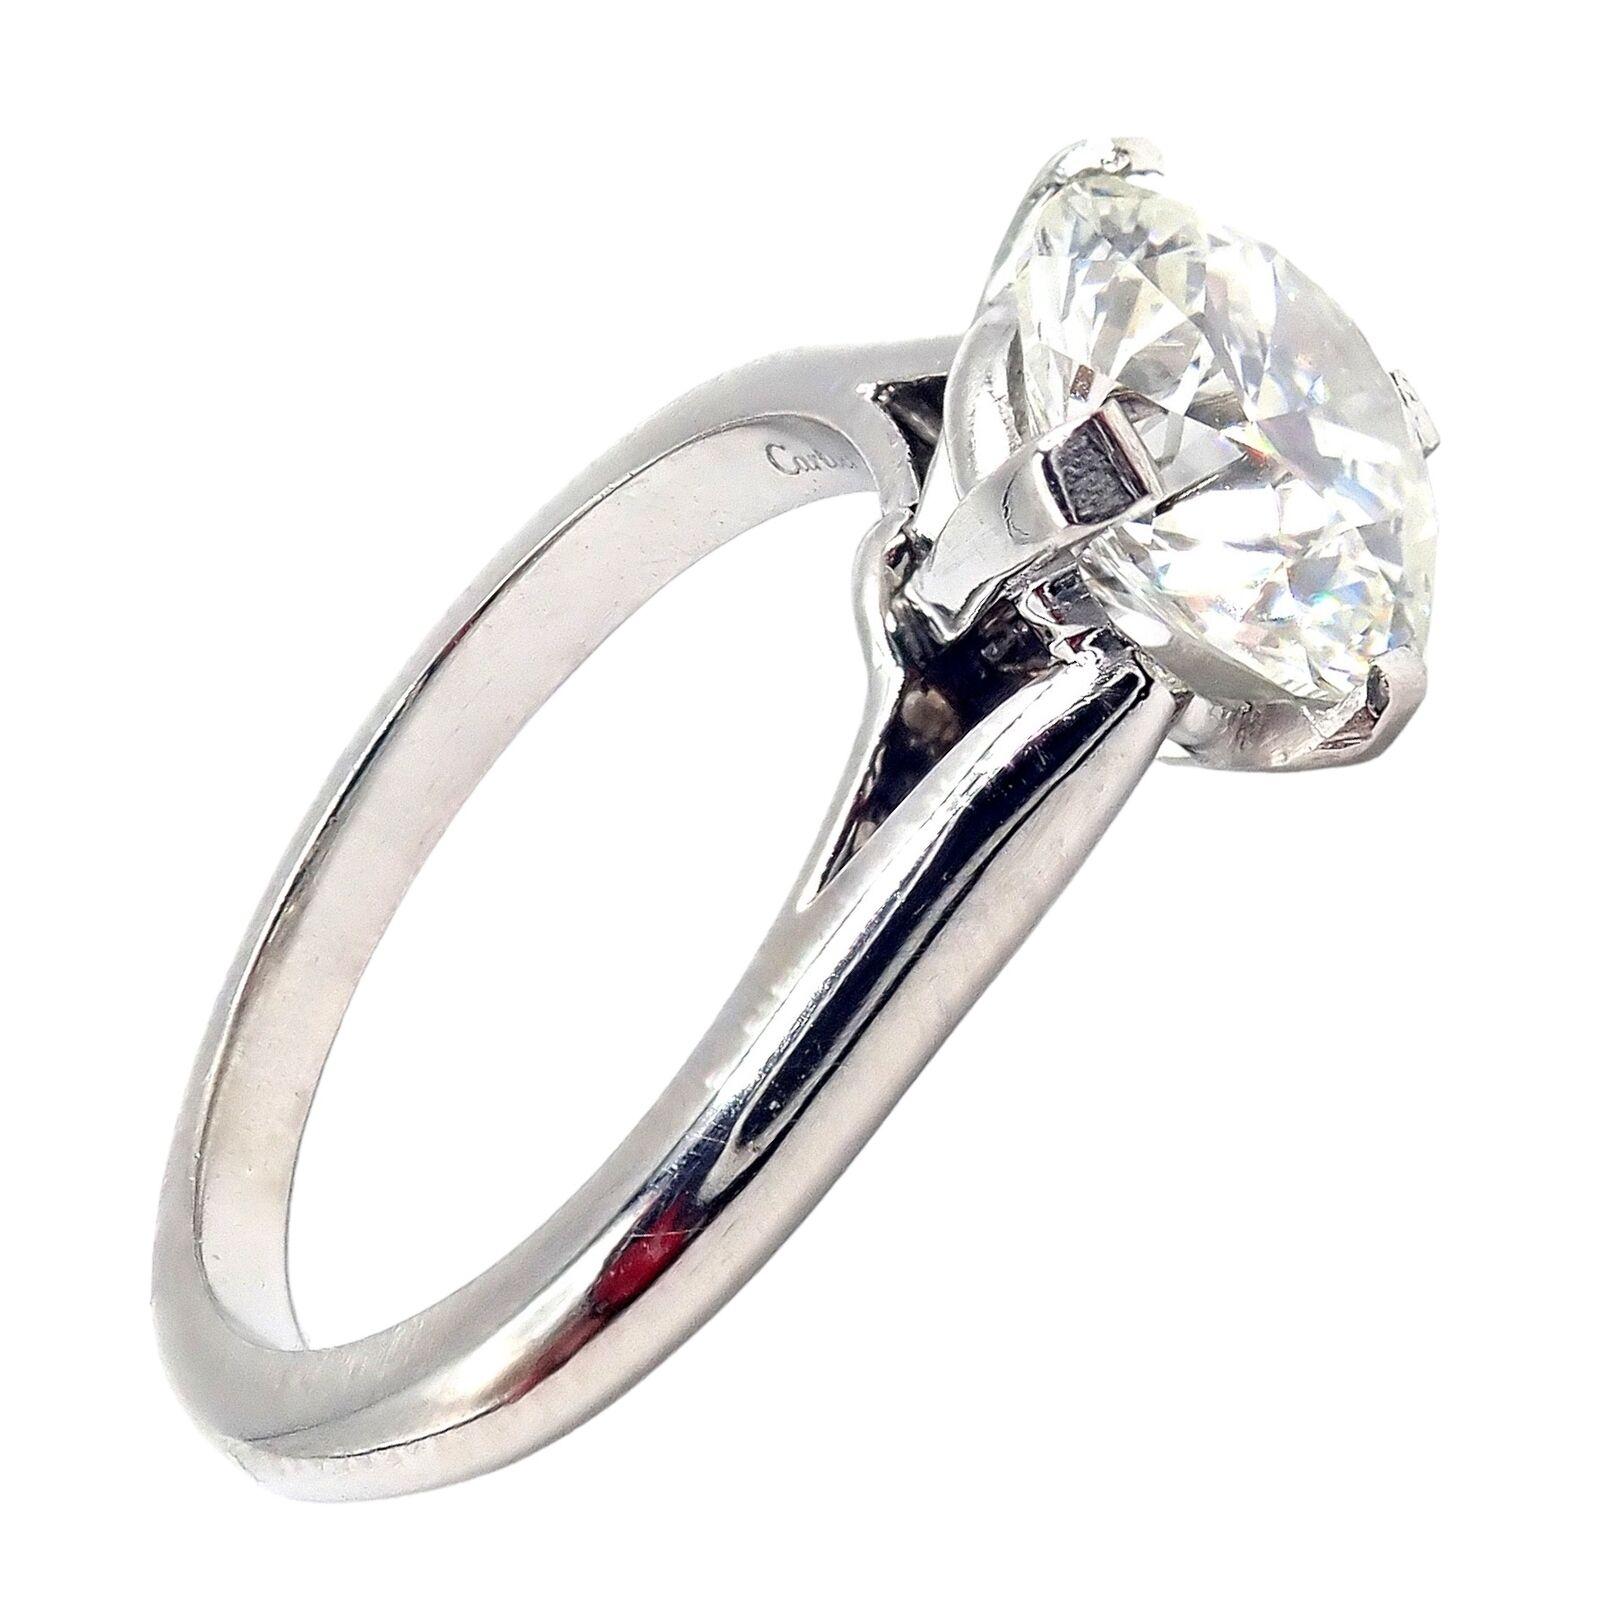 Cartier 1.70ct VVS1 H Color Diamond Solitaire Engagement Platinum Ring In Excellent Condition For Sale In Holland, PA